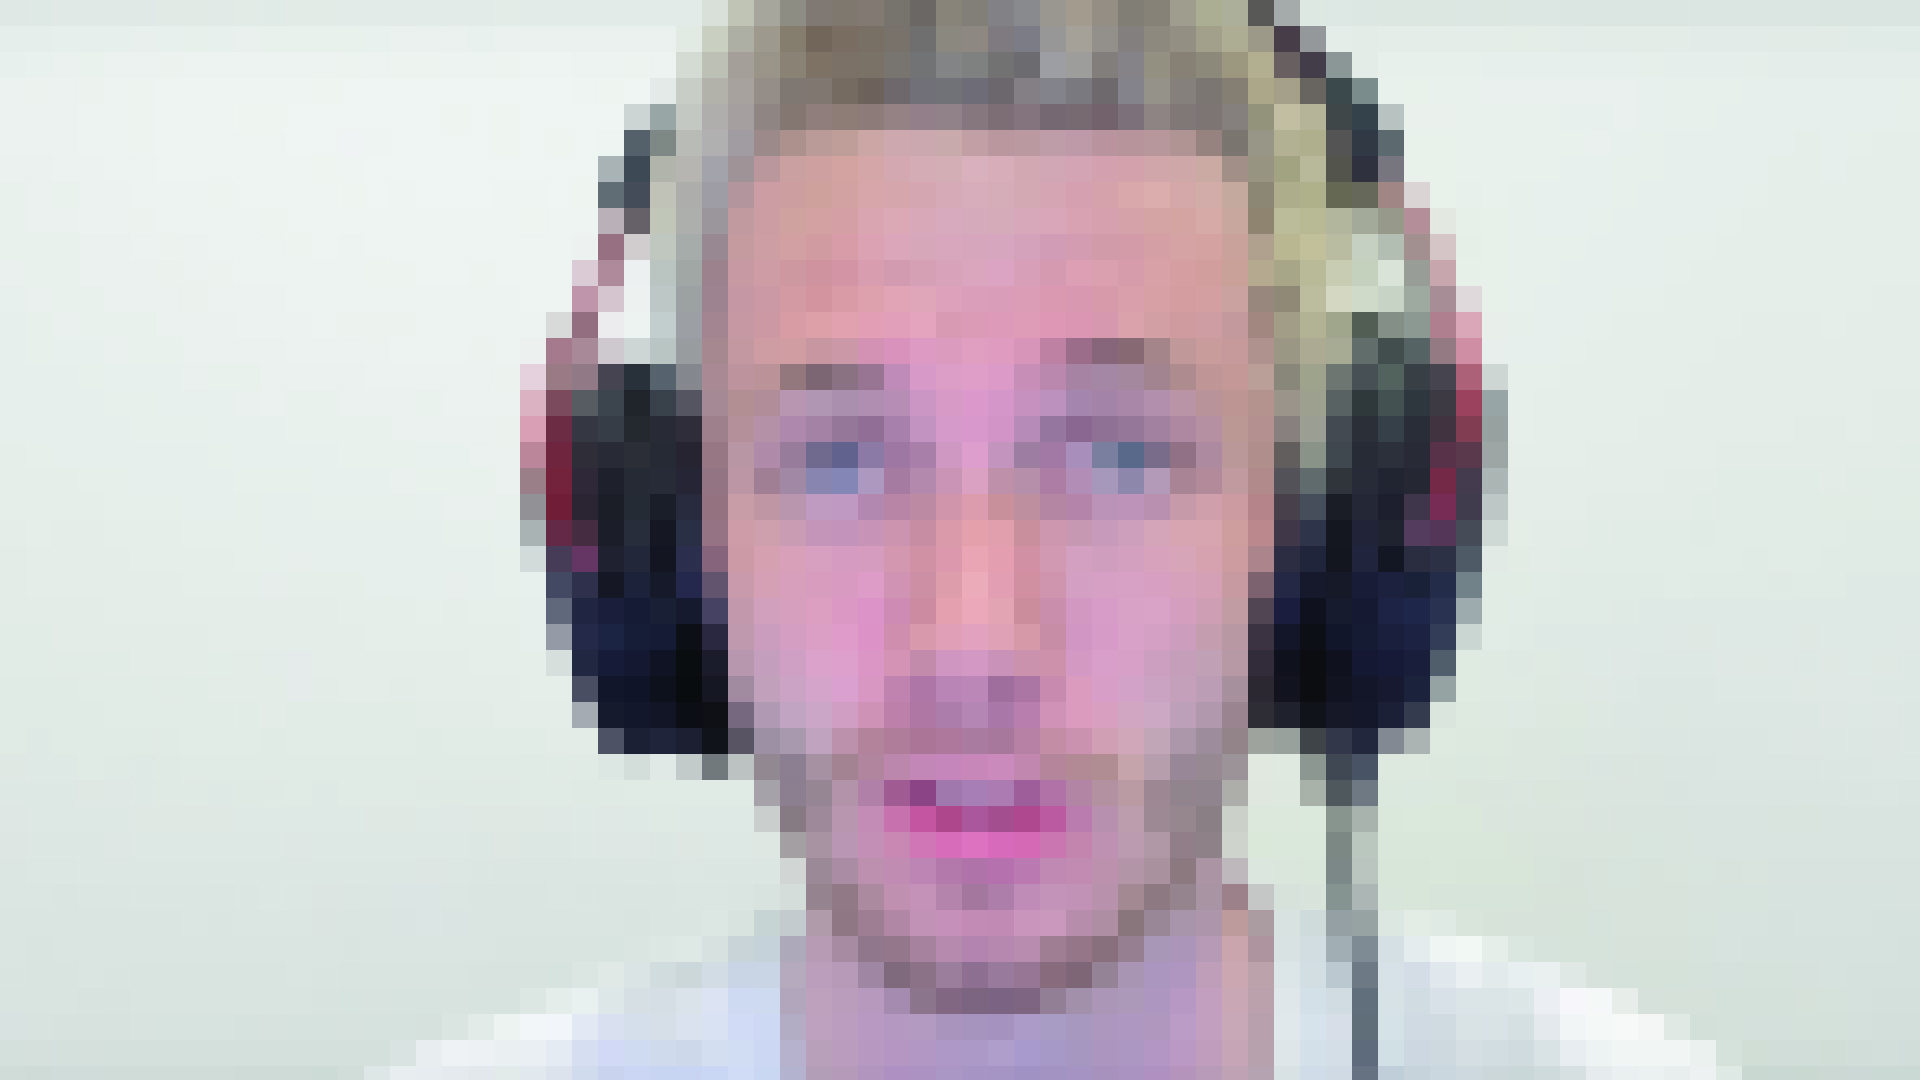 A pixelated image of a YouTube gamer